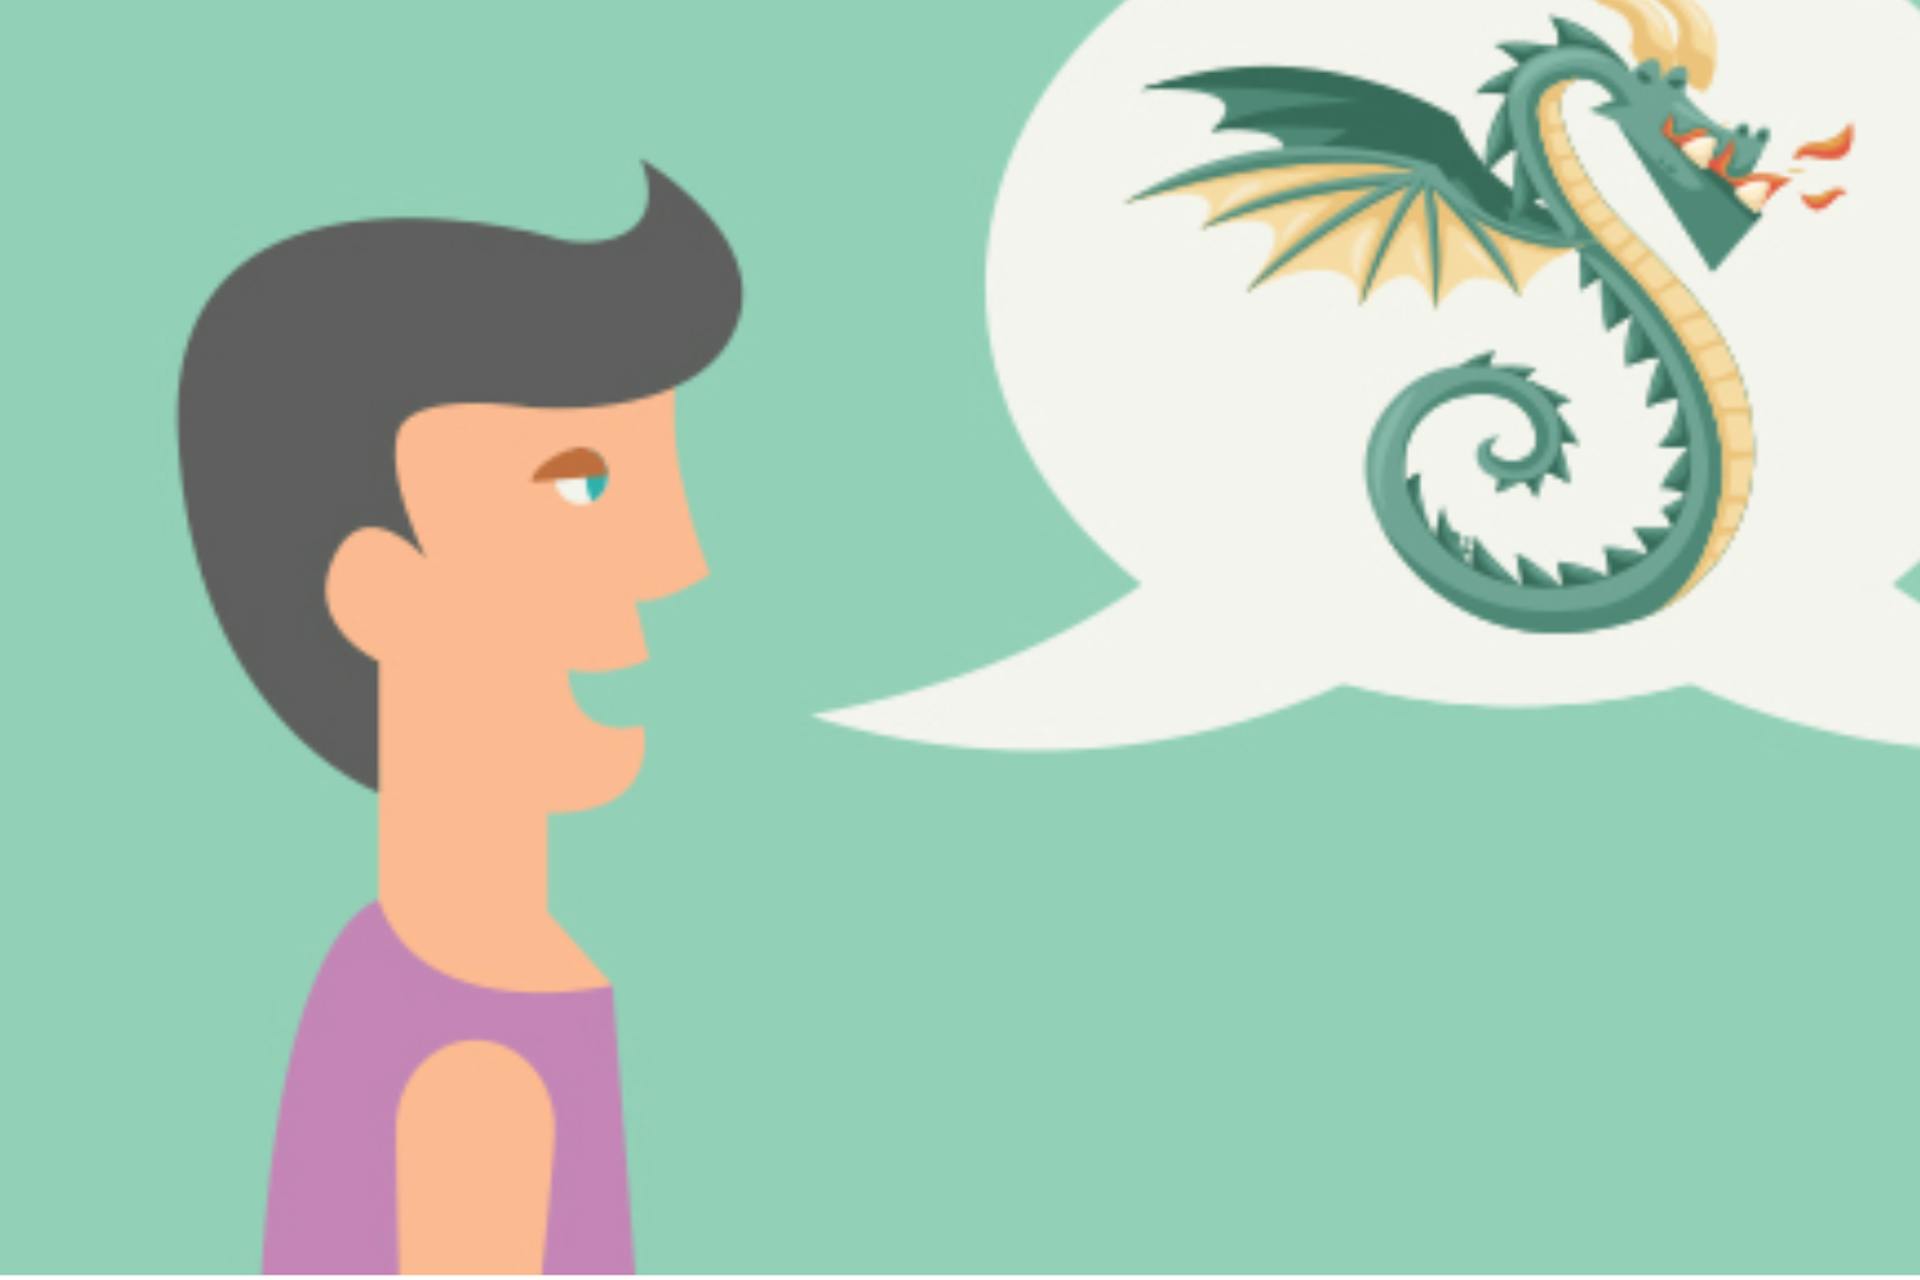 Boy talking and a speech bubble with a dragon in it.